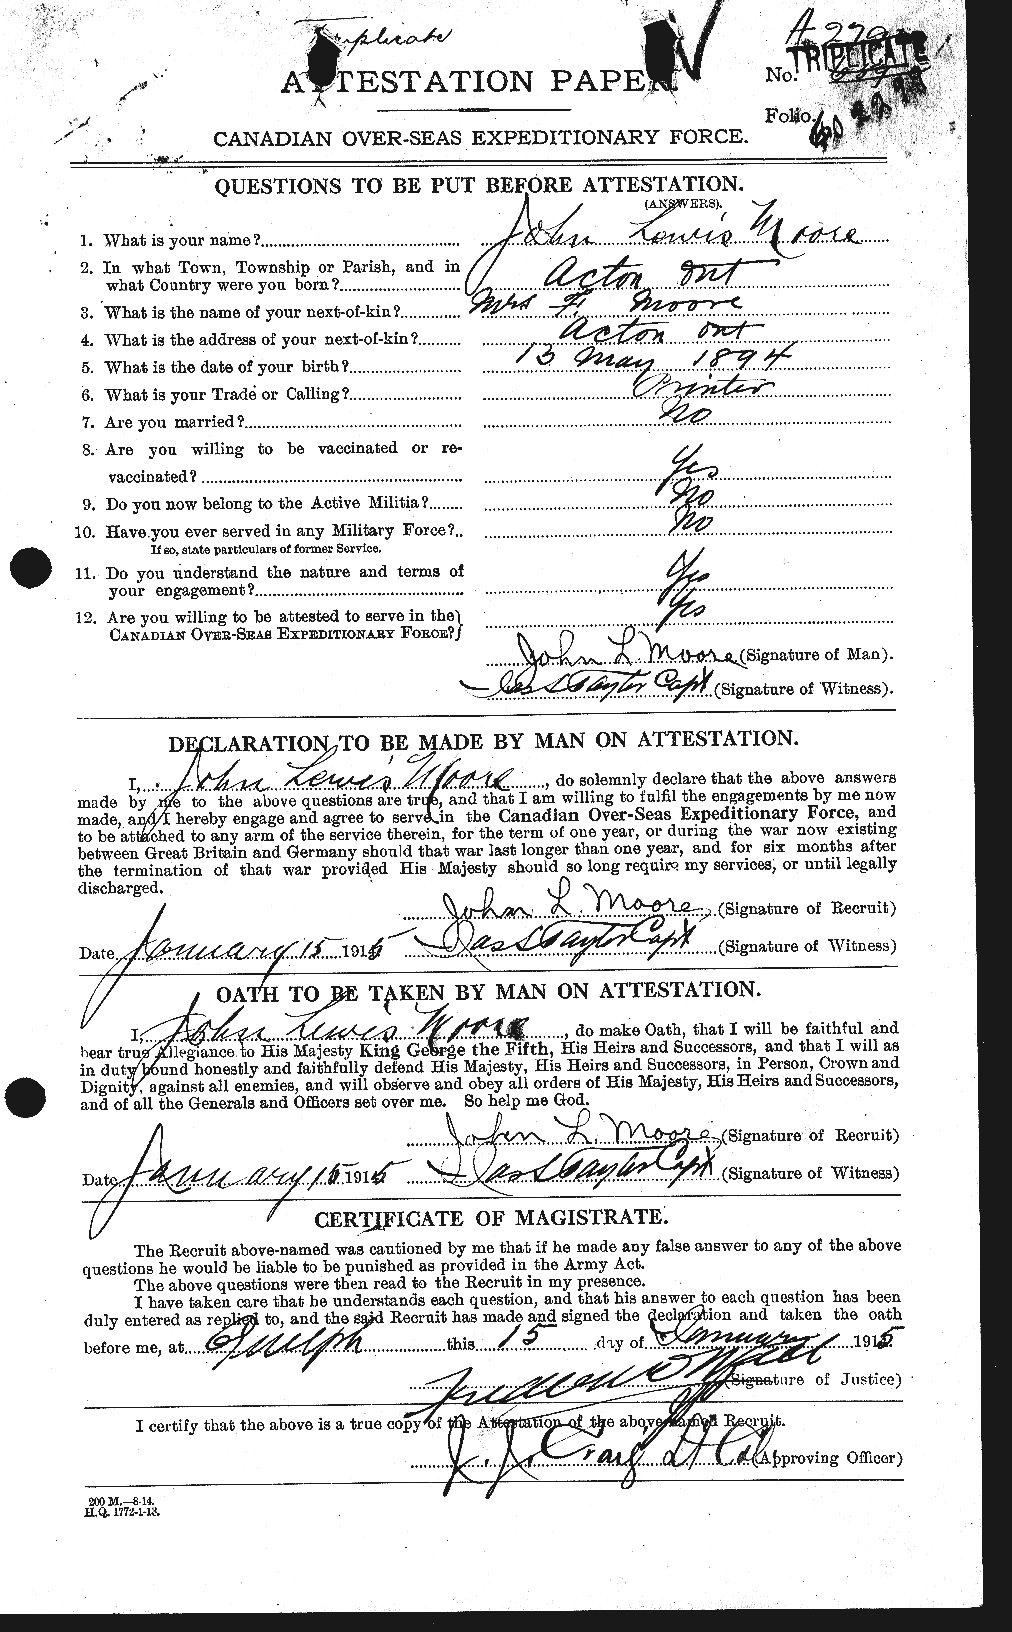 Personnel Records of the First World War - CEF 503309a